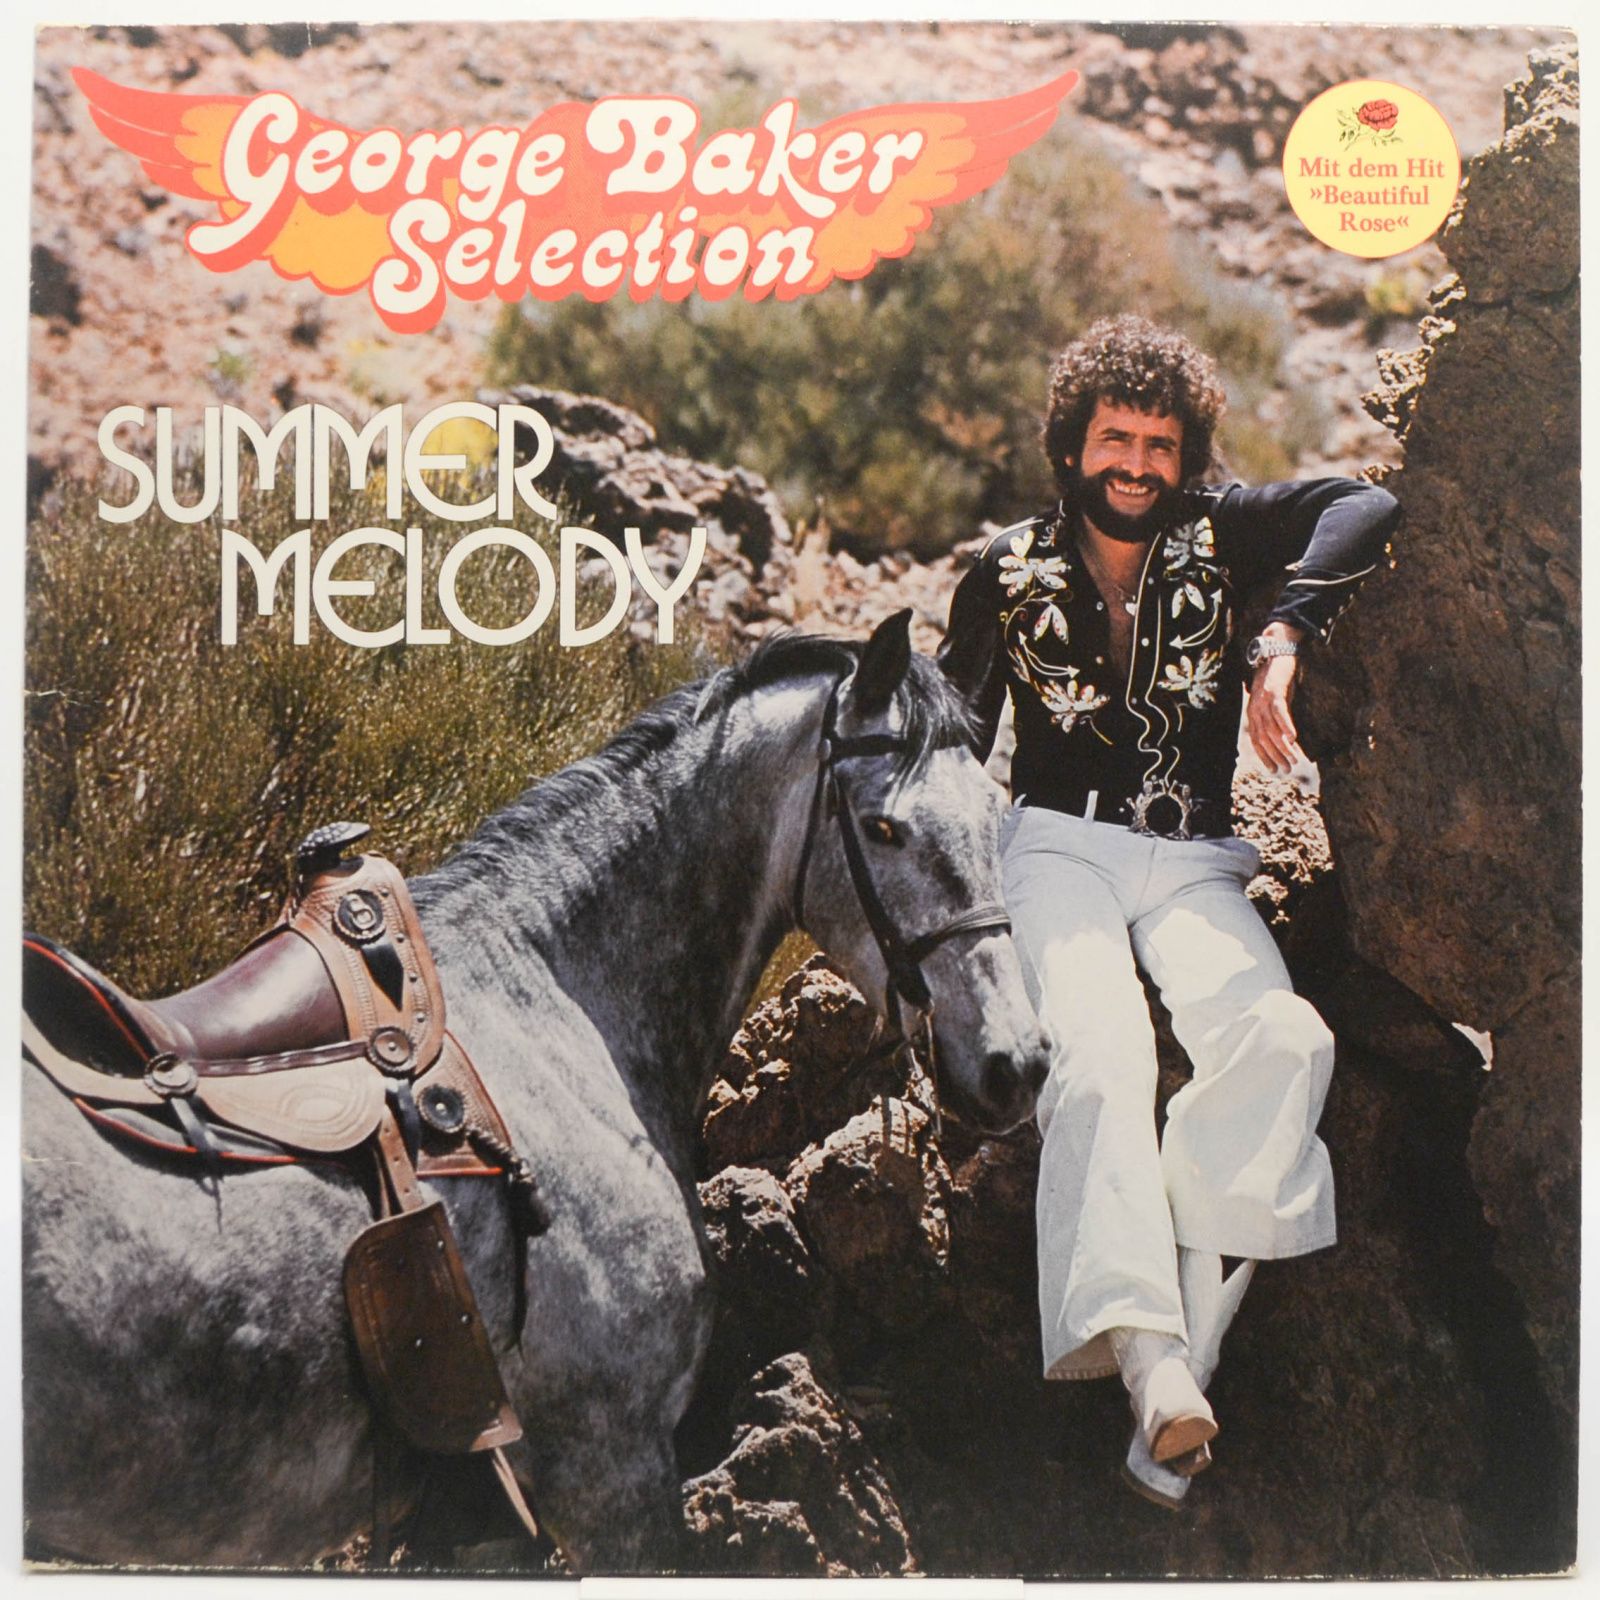 George Baker Selection — Summer Melody, 1977